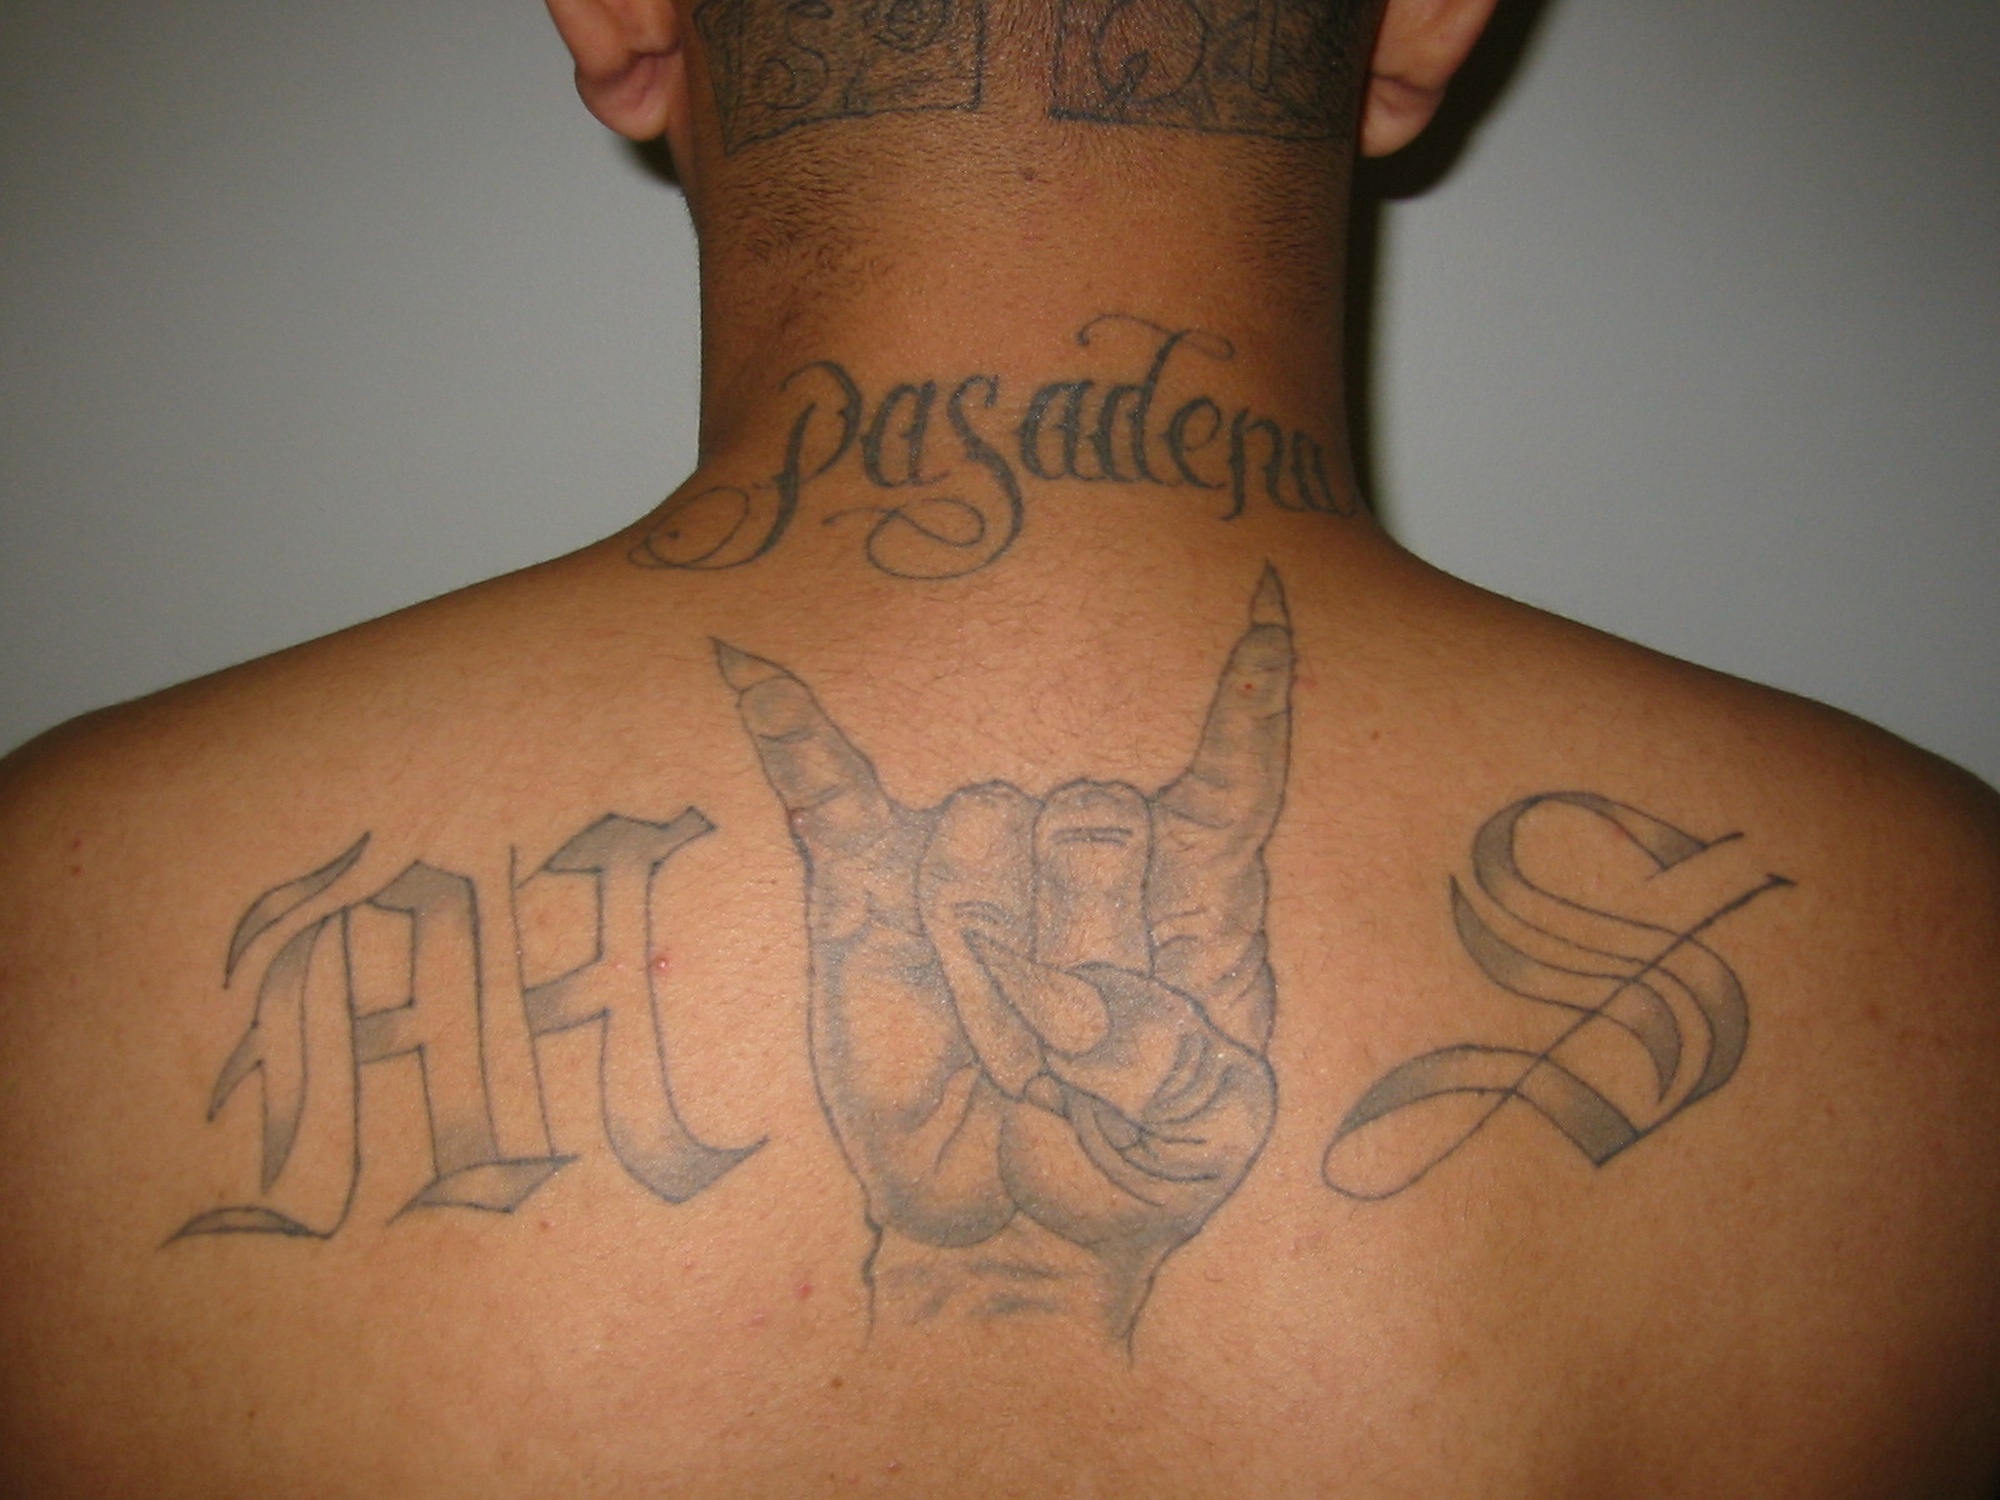 MS13 gang The story behind one of the worlds most brutal street gangs   BBC News